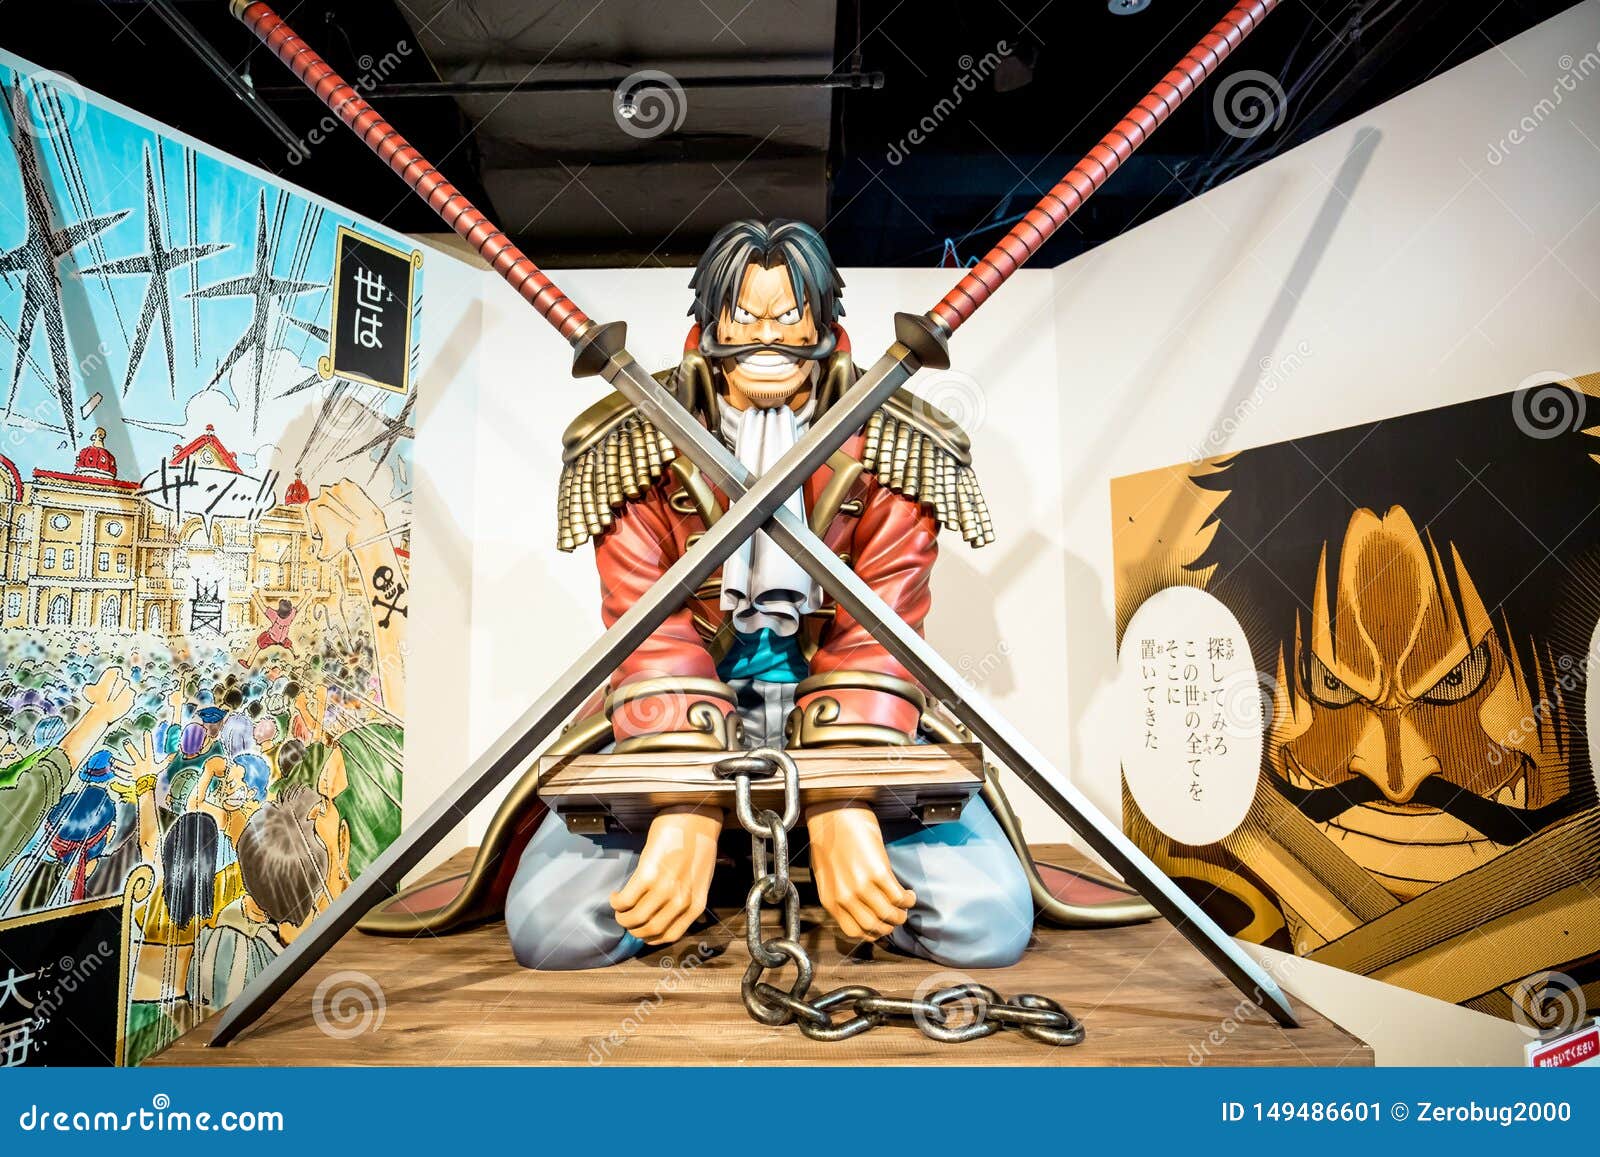 Pirate Onepiece Photos Free Royalty Free Stock Photos From Dreamstime